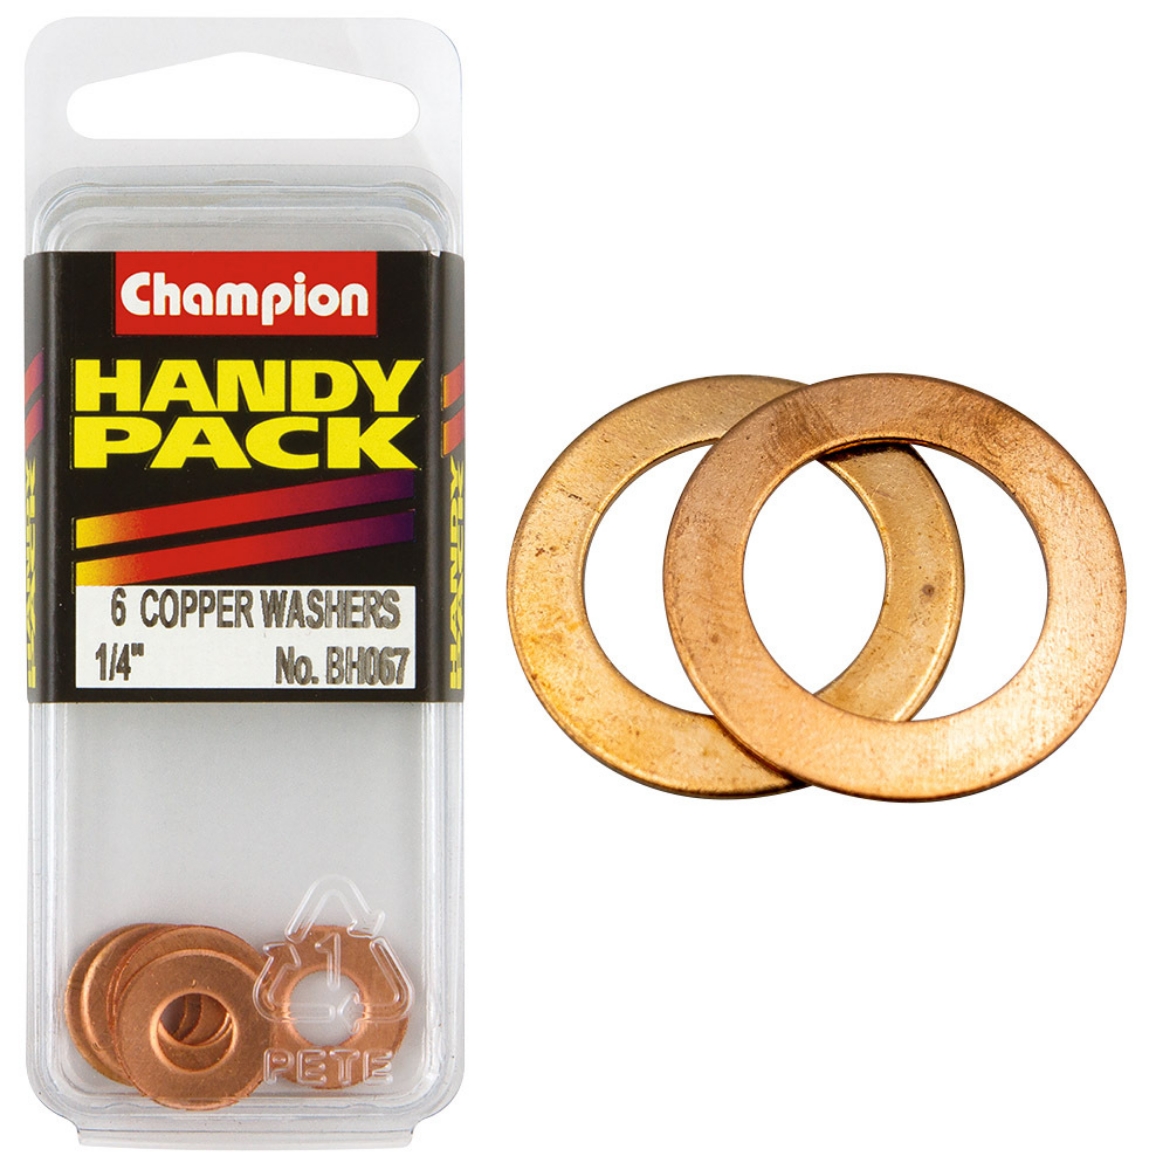 Picture of Handy Pk Copper Washers 20g 1/4x9/16 CWC (Pkt.6)